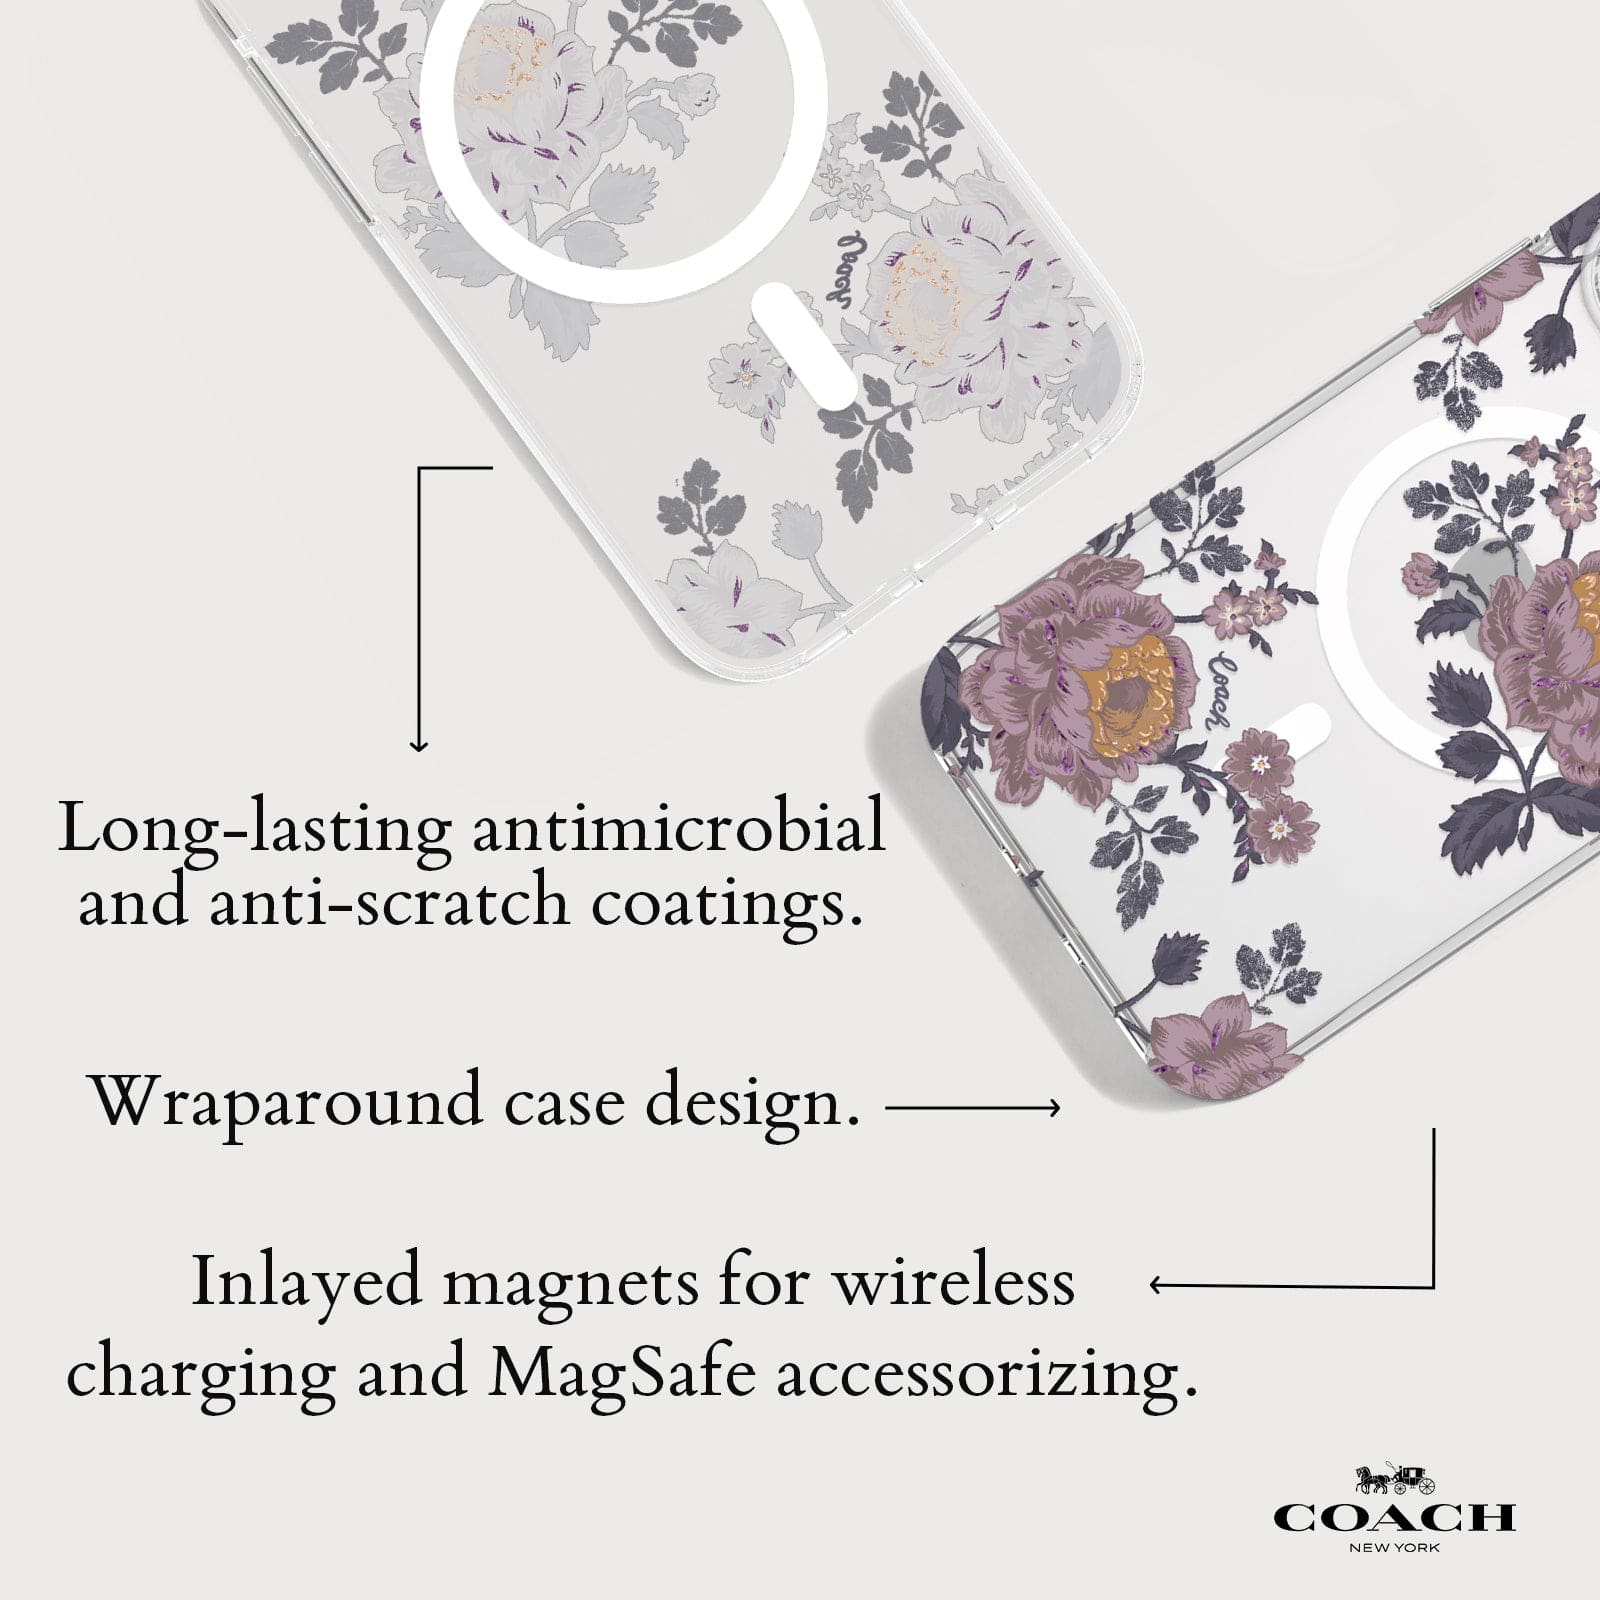 LONG-LASTING ANTIMICROBIAL AND ANTI-SCRATCH COATINGS. WRAPAROUND CASE DESIGN. INLAYED MAGNETS FOR WIRELESS CHARGING AND MAGSAFE ACCESSORIZING.